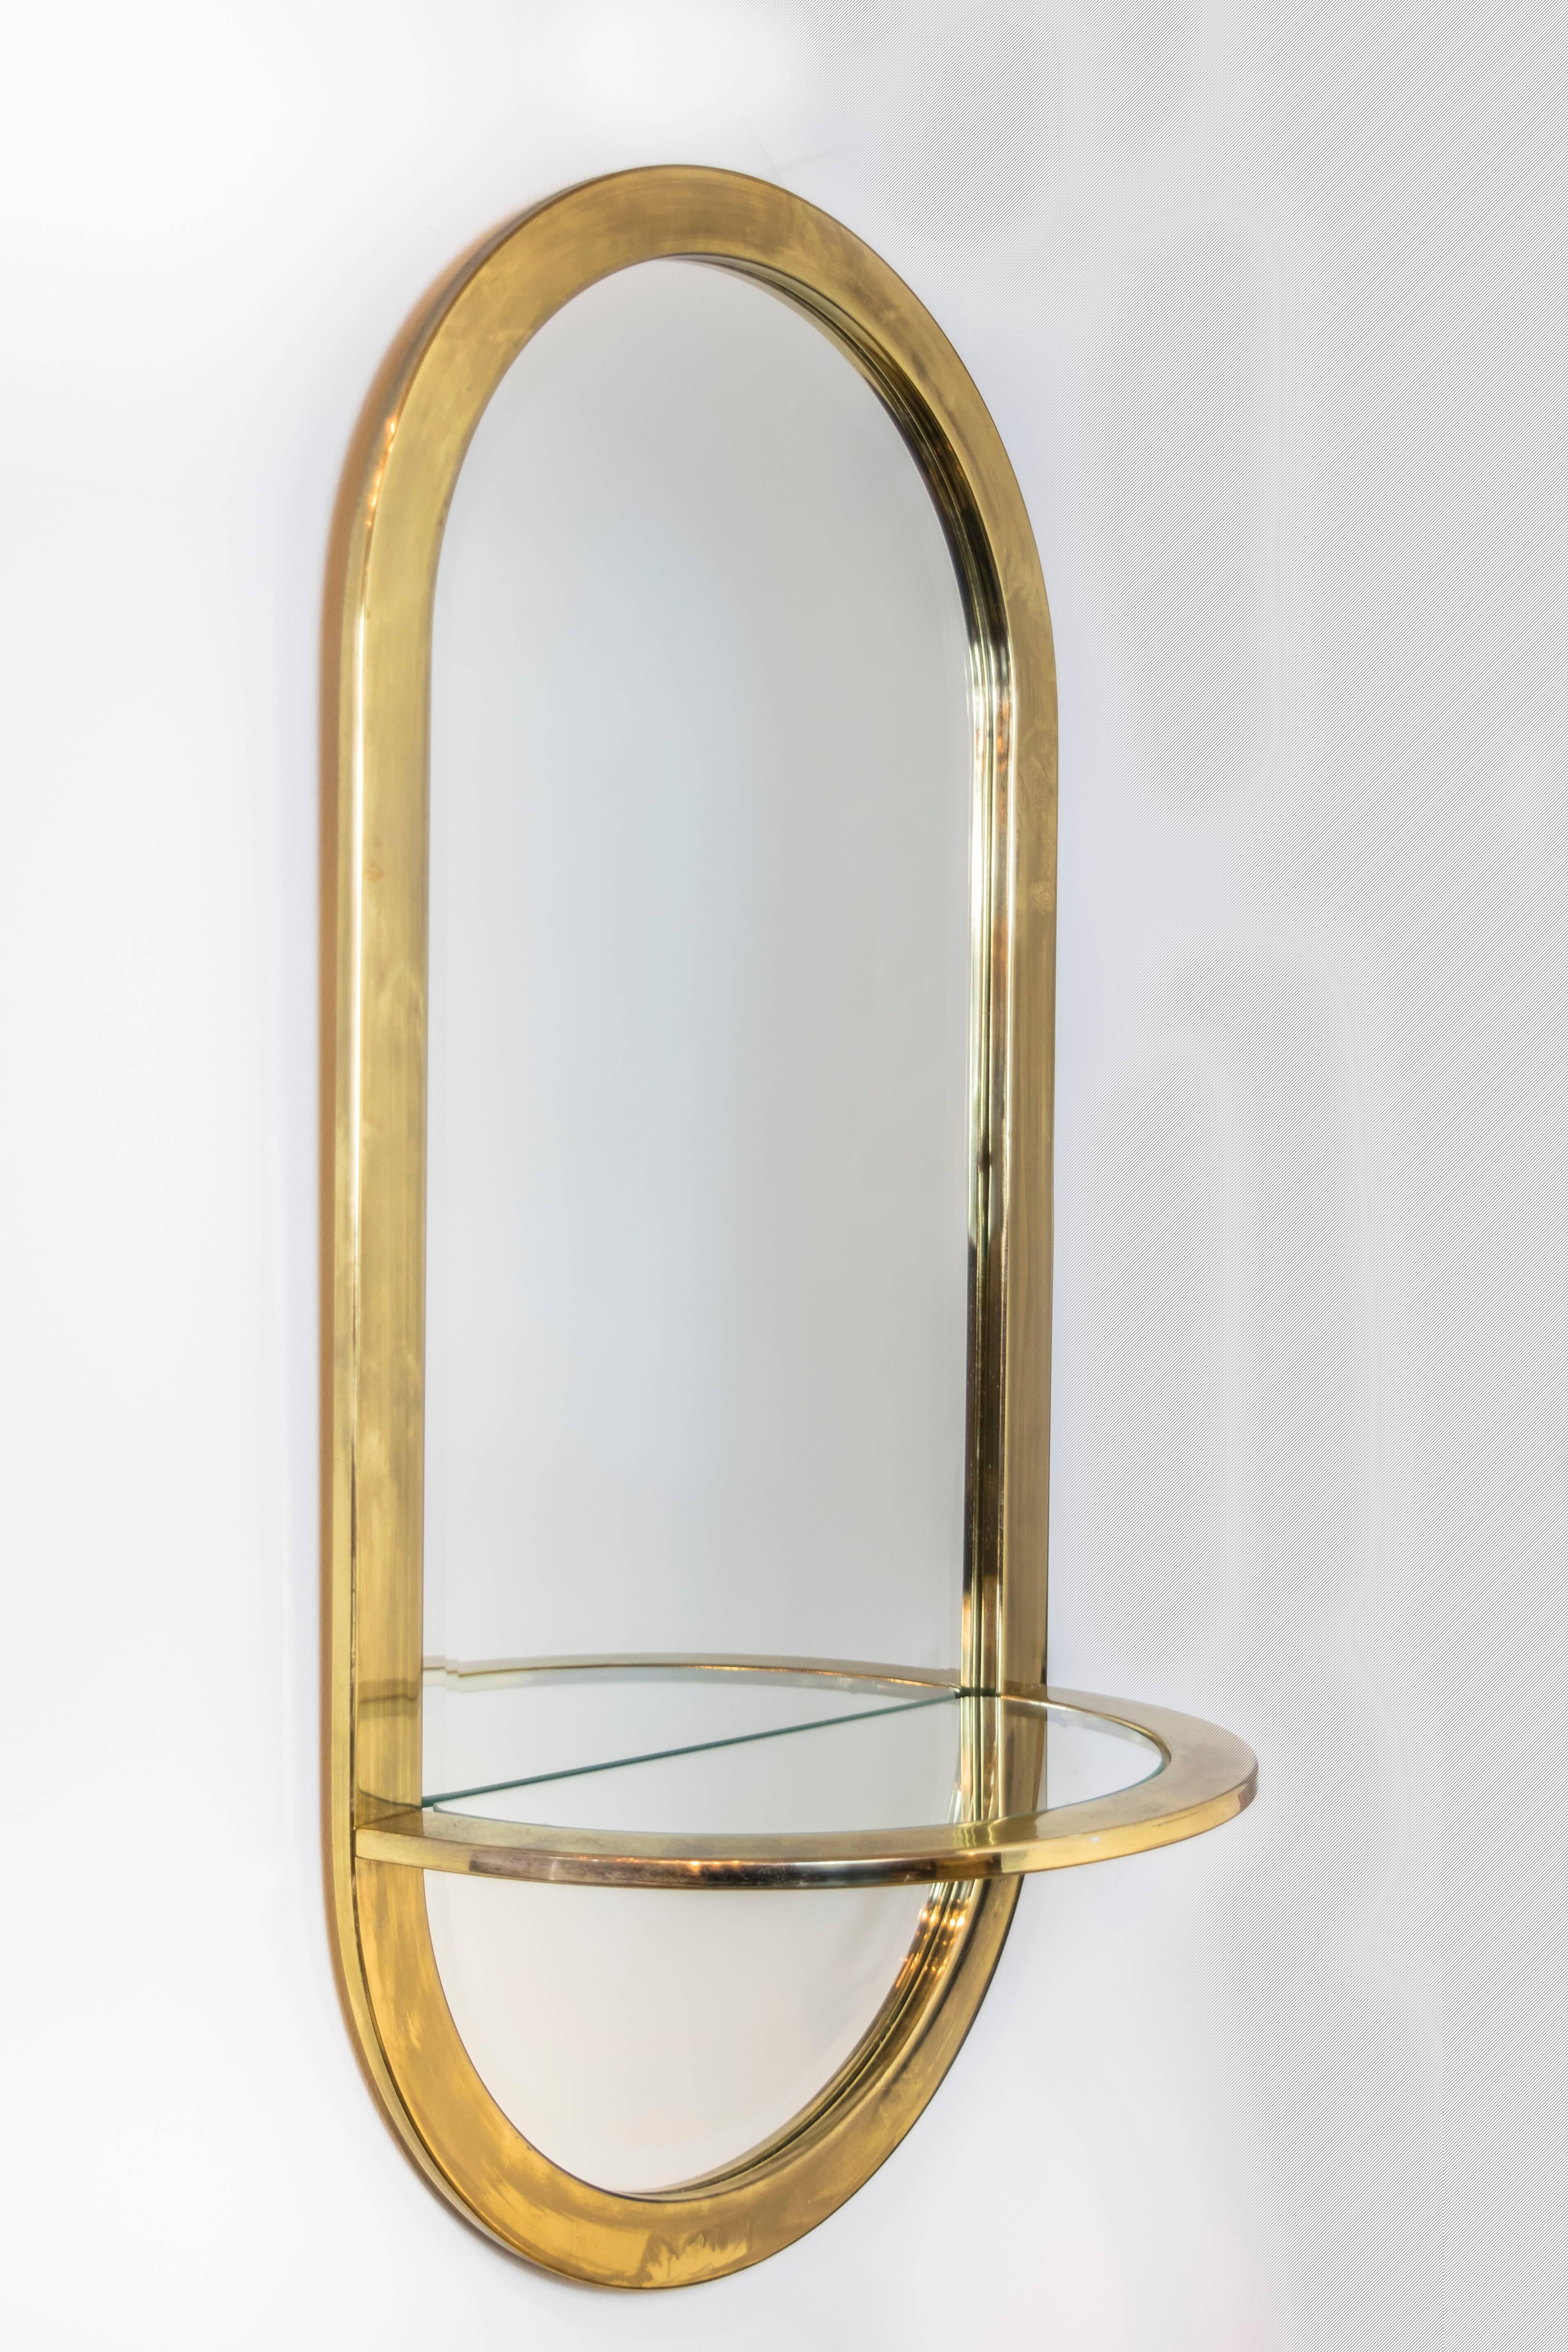 Classic late 1960s or early 1970s design by DIA, this brass-plated mirror has beveled edges and a glass shelf, perfect for a powder room or entry hall.